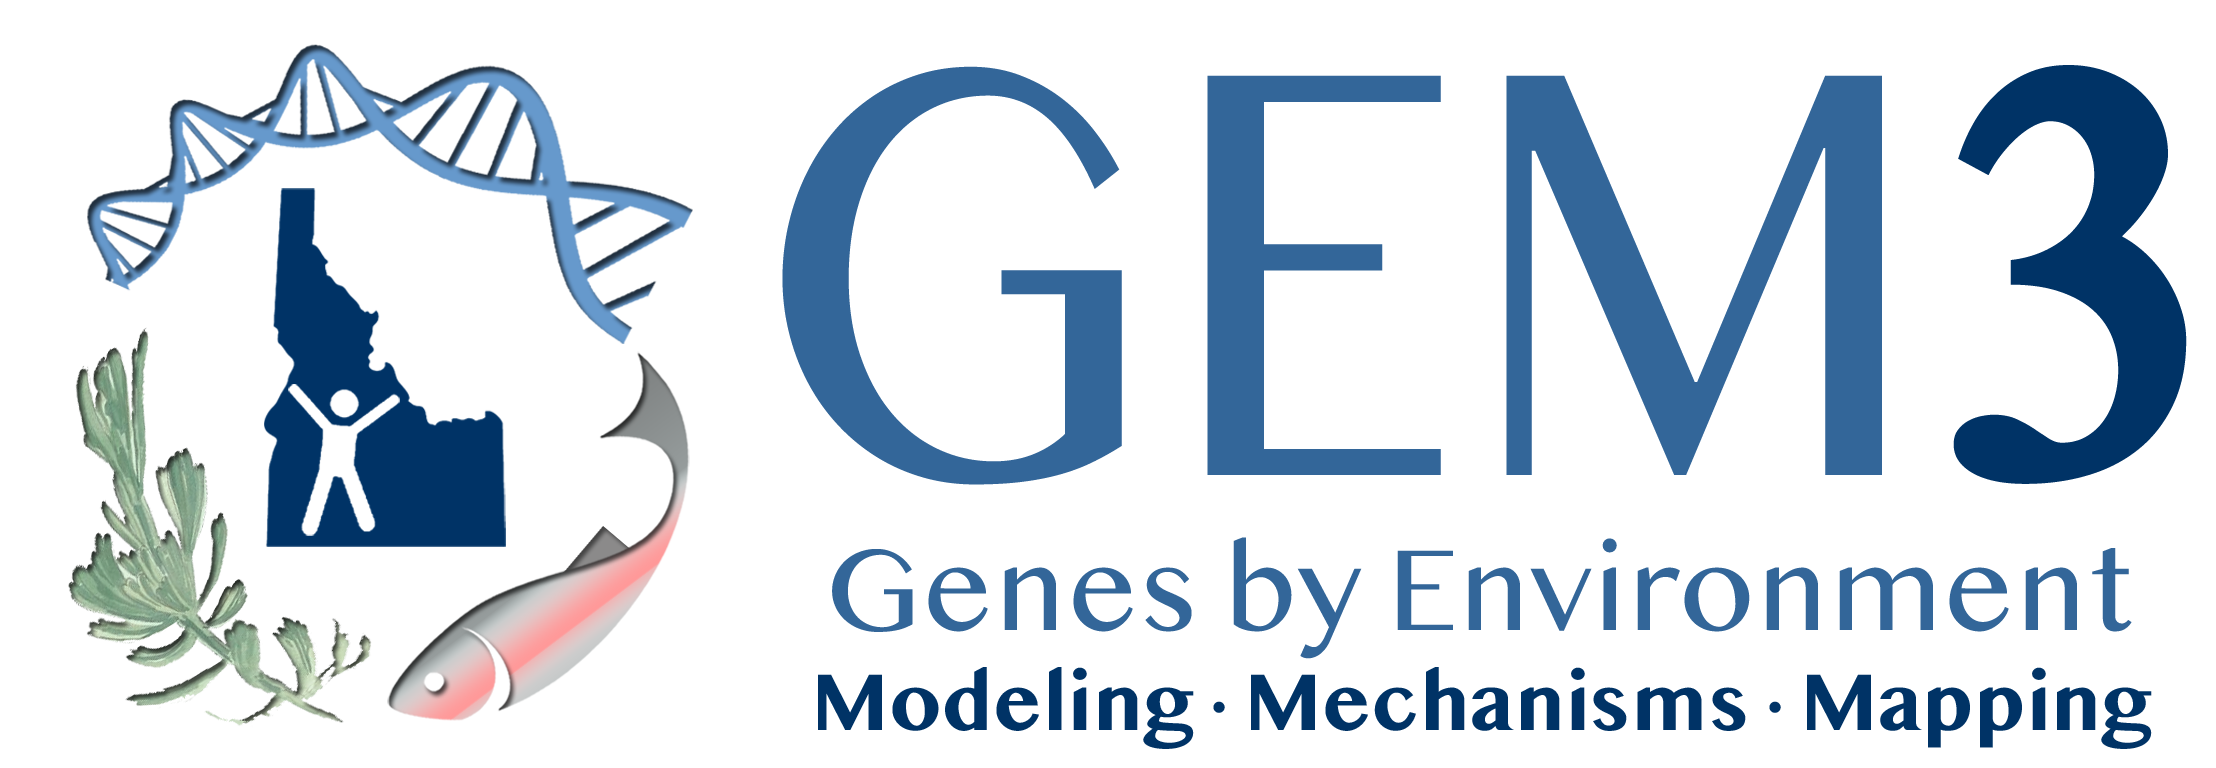 Genes by Environment